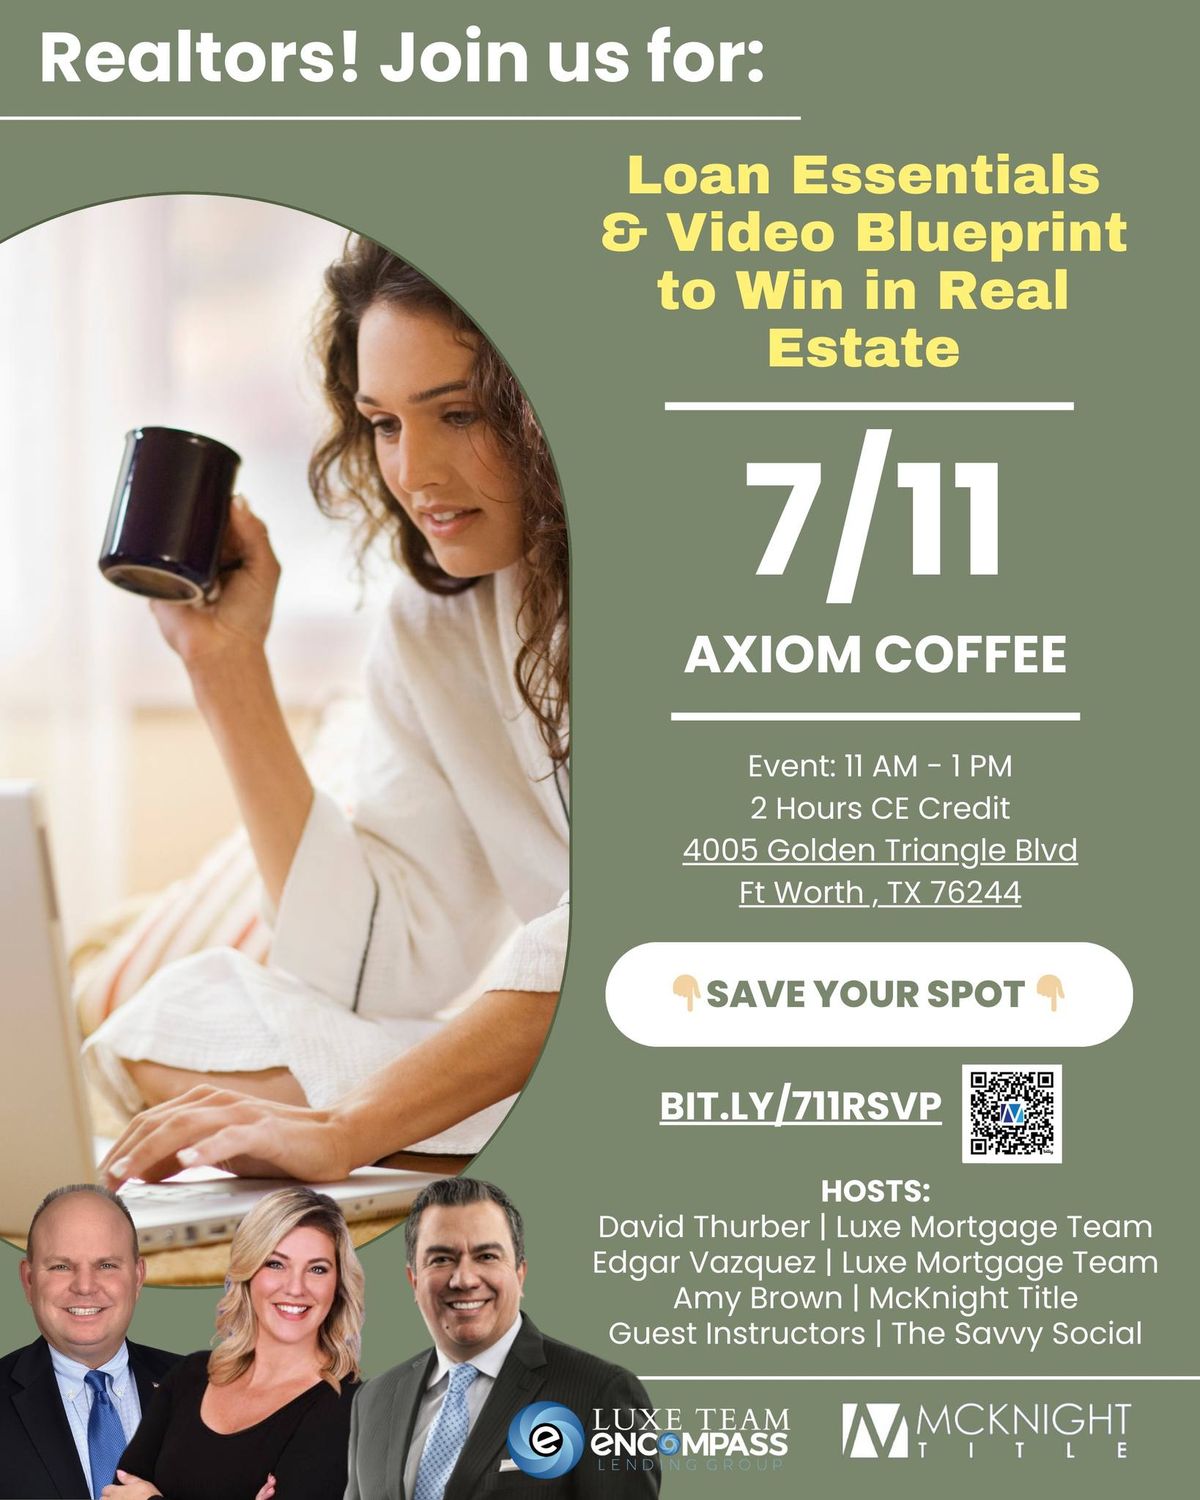 Loan Essentials & Video Blueprint to Win in Real Estate